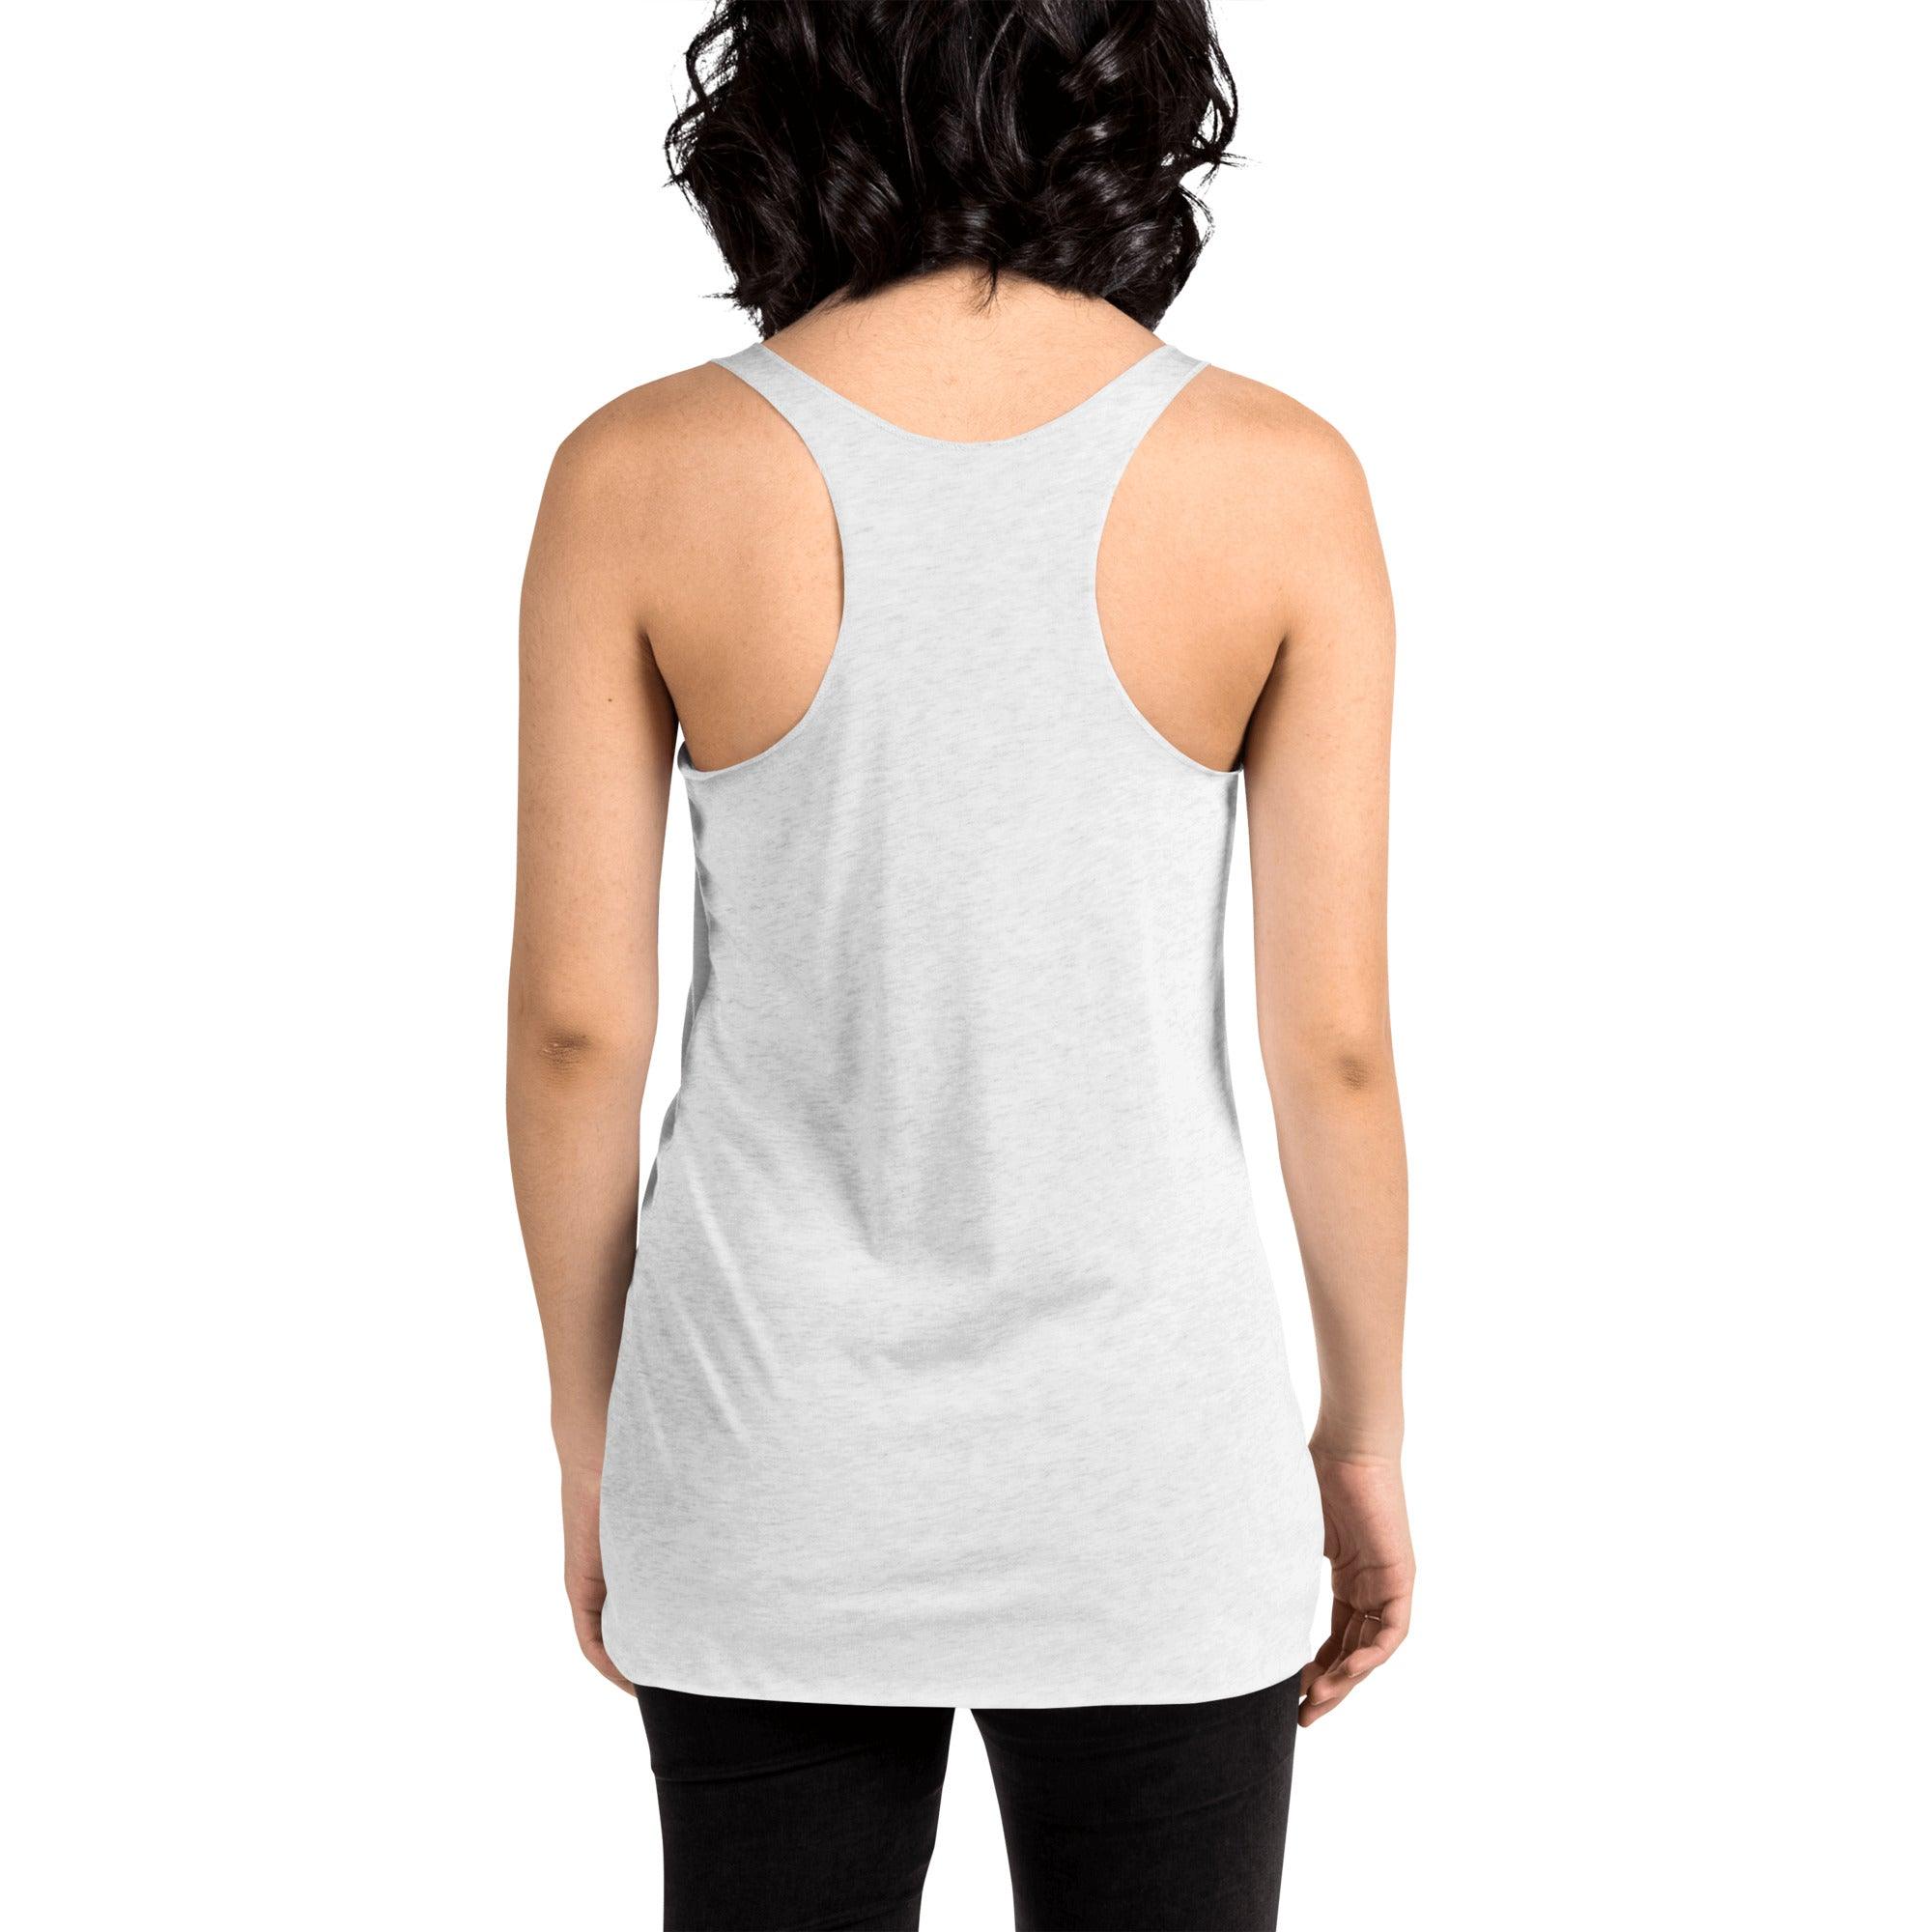 GEARTA - White Racerback Tank with a Flowing Fit